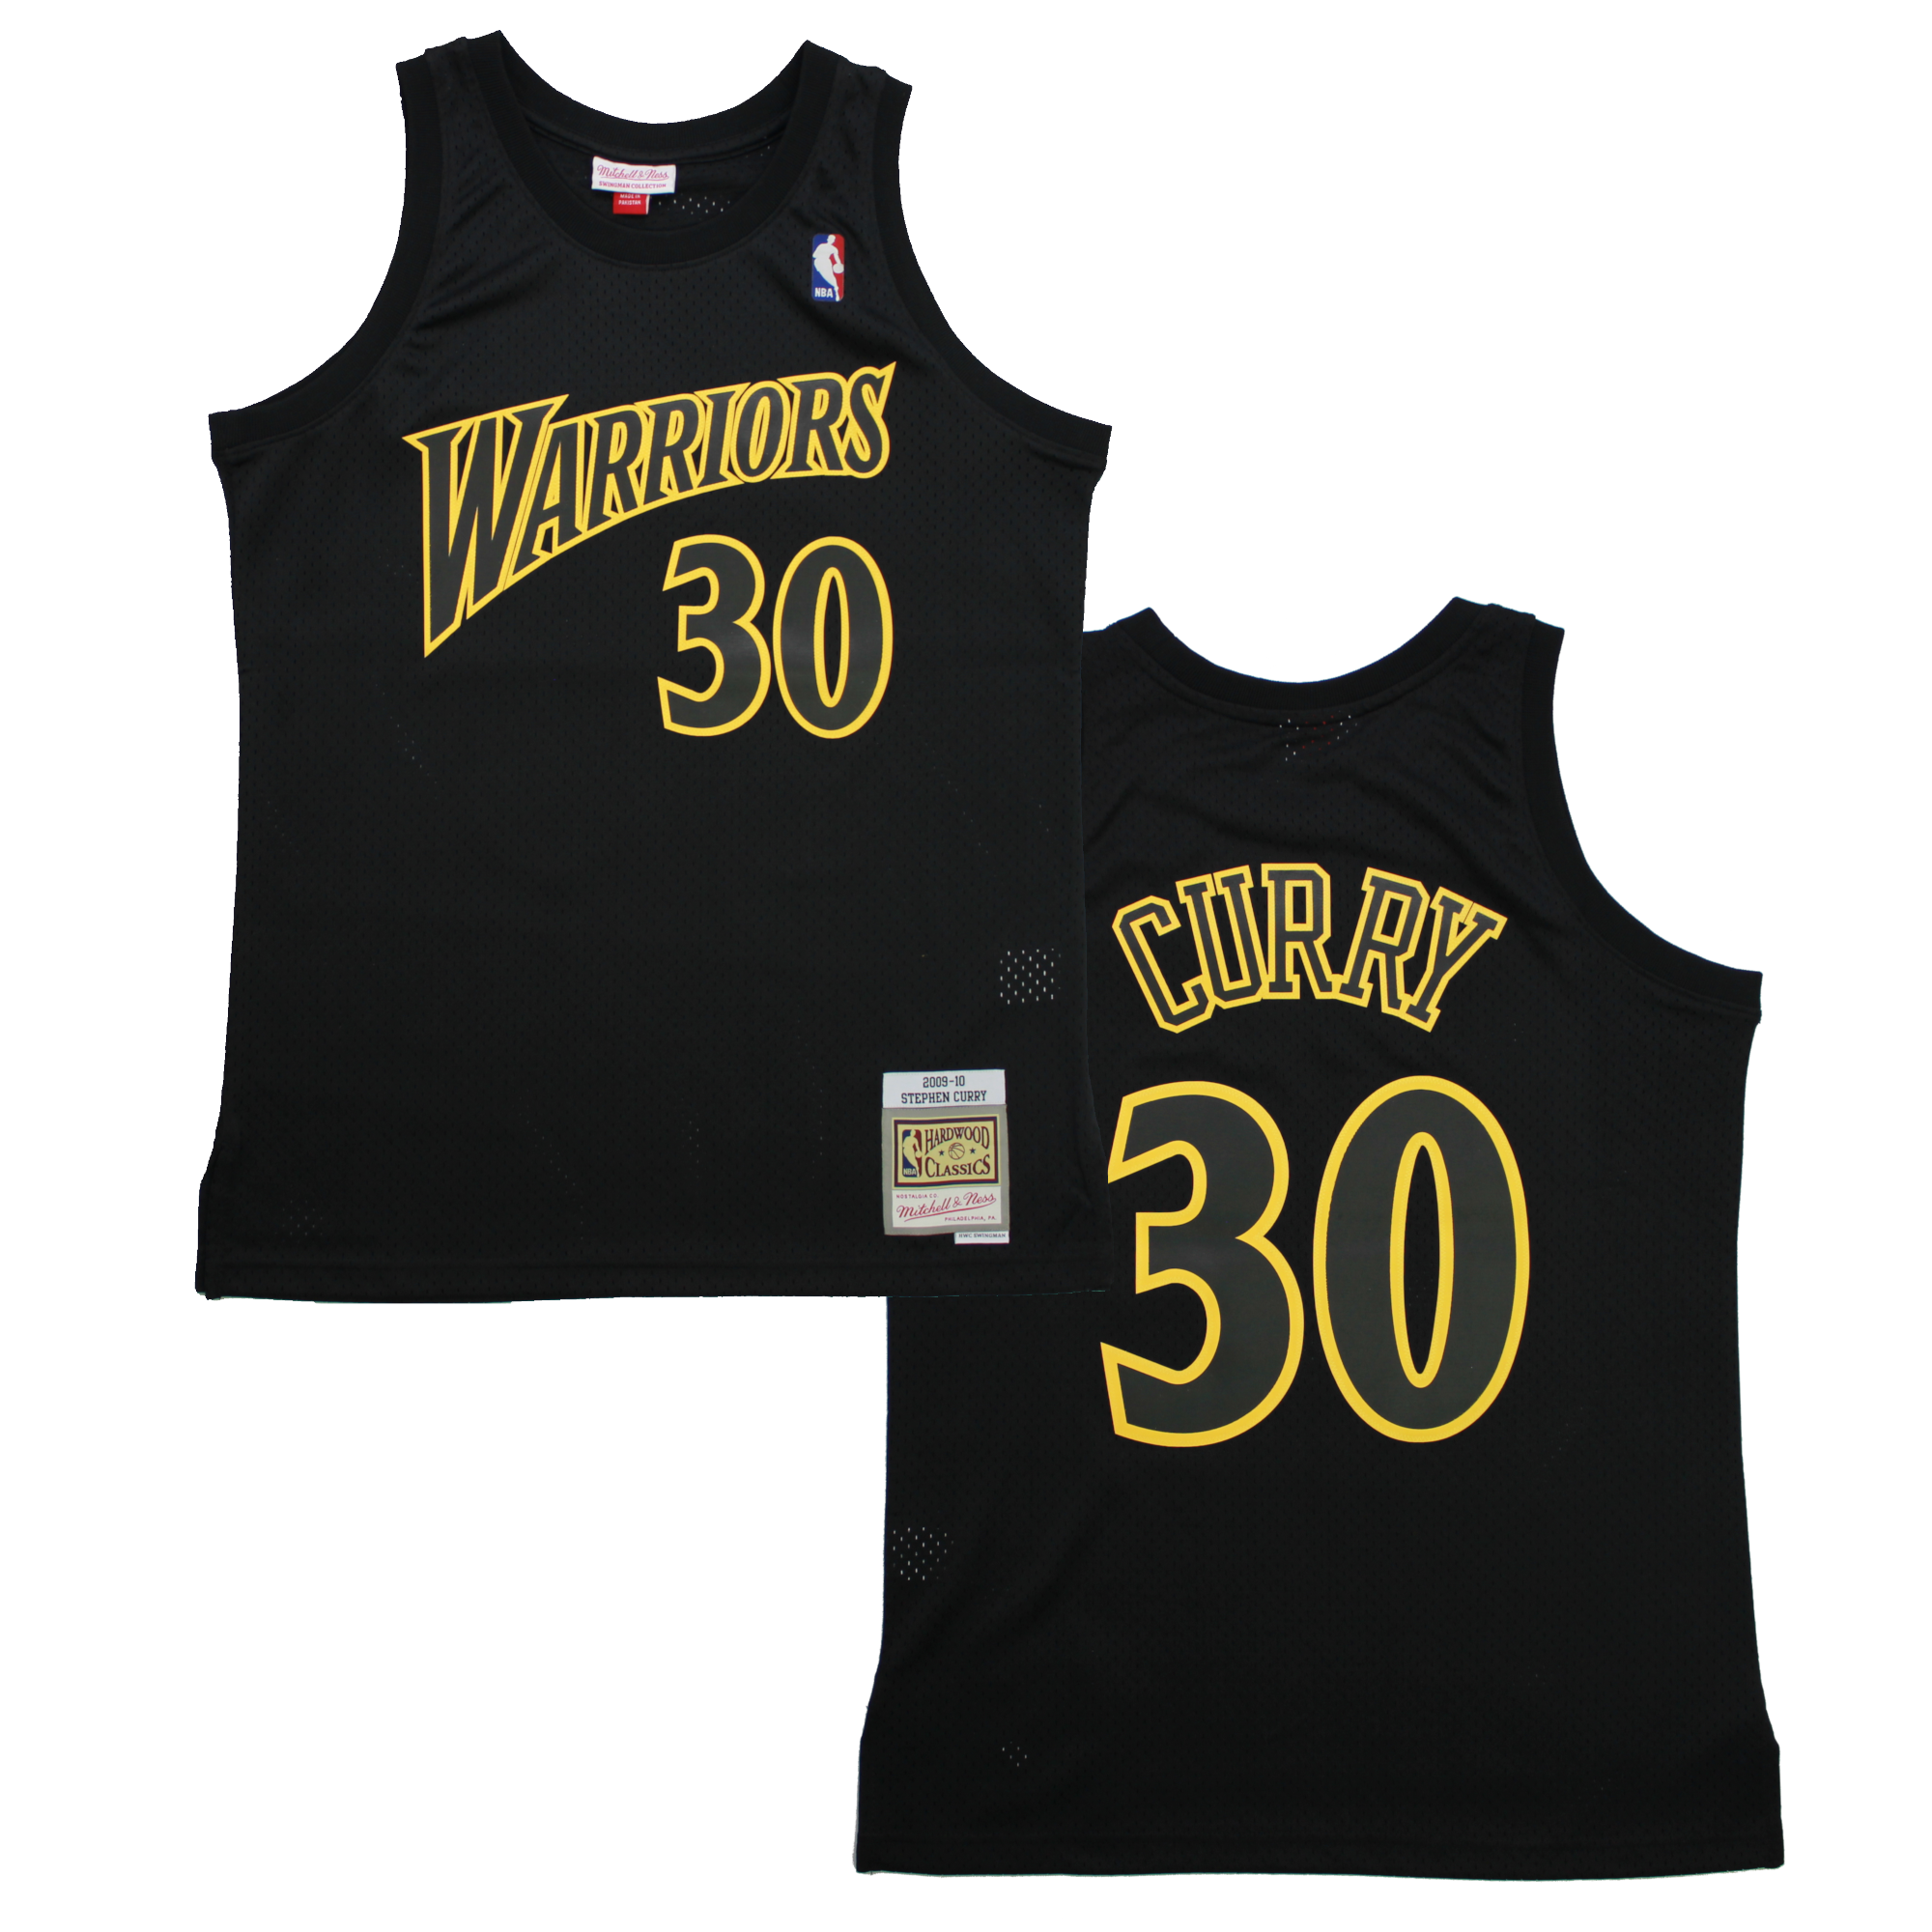 Golden State Warriors Apparel, Collections